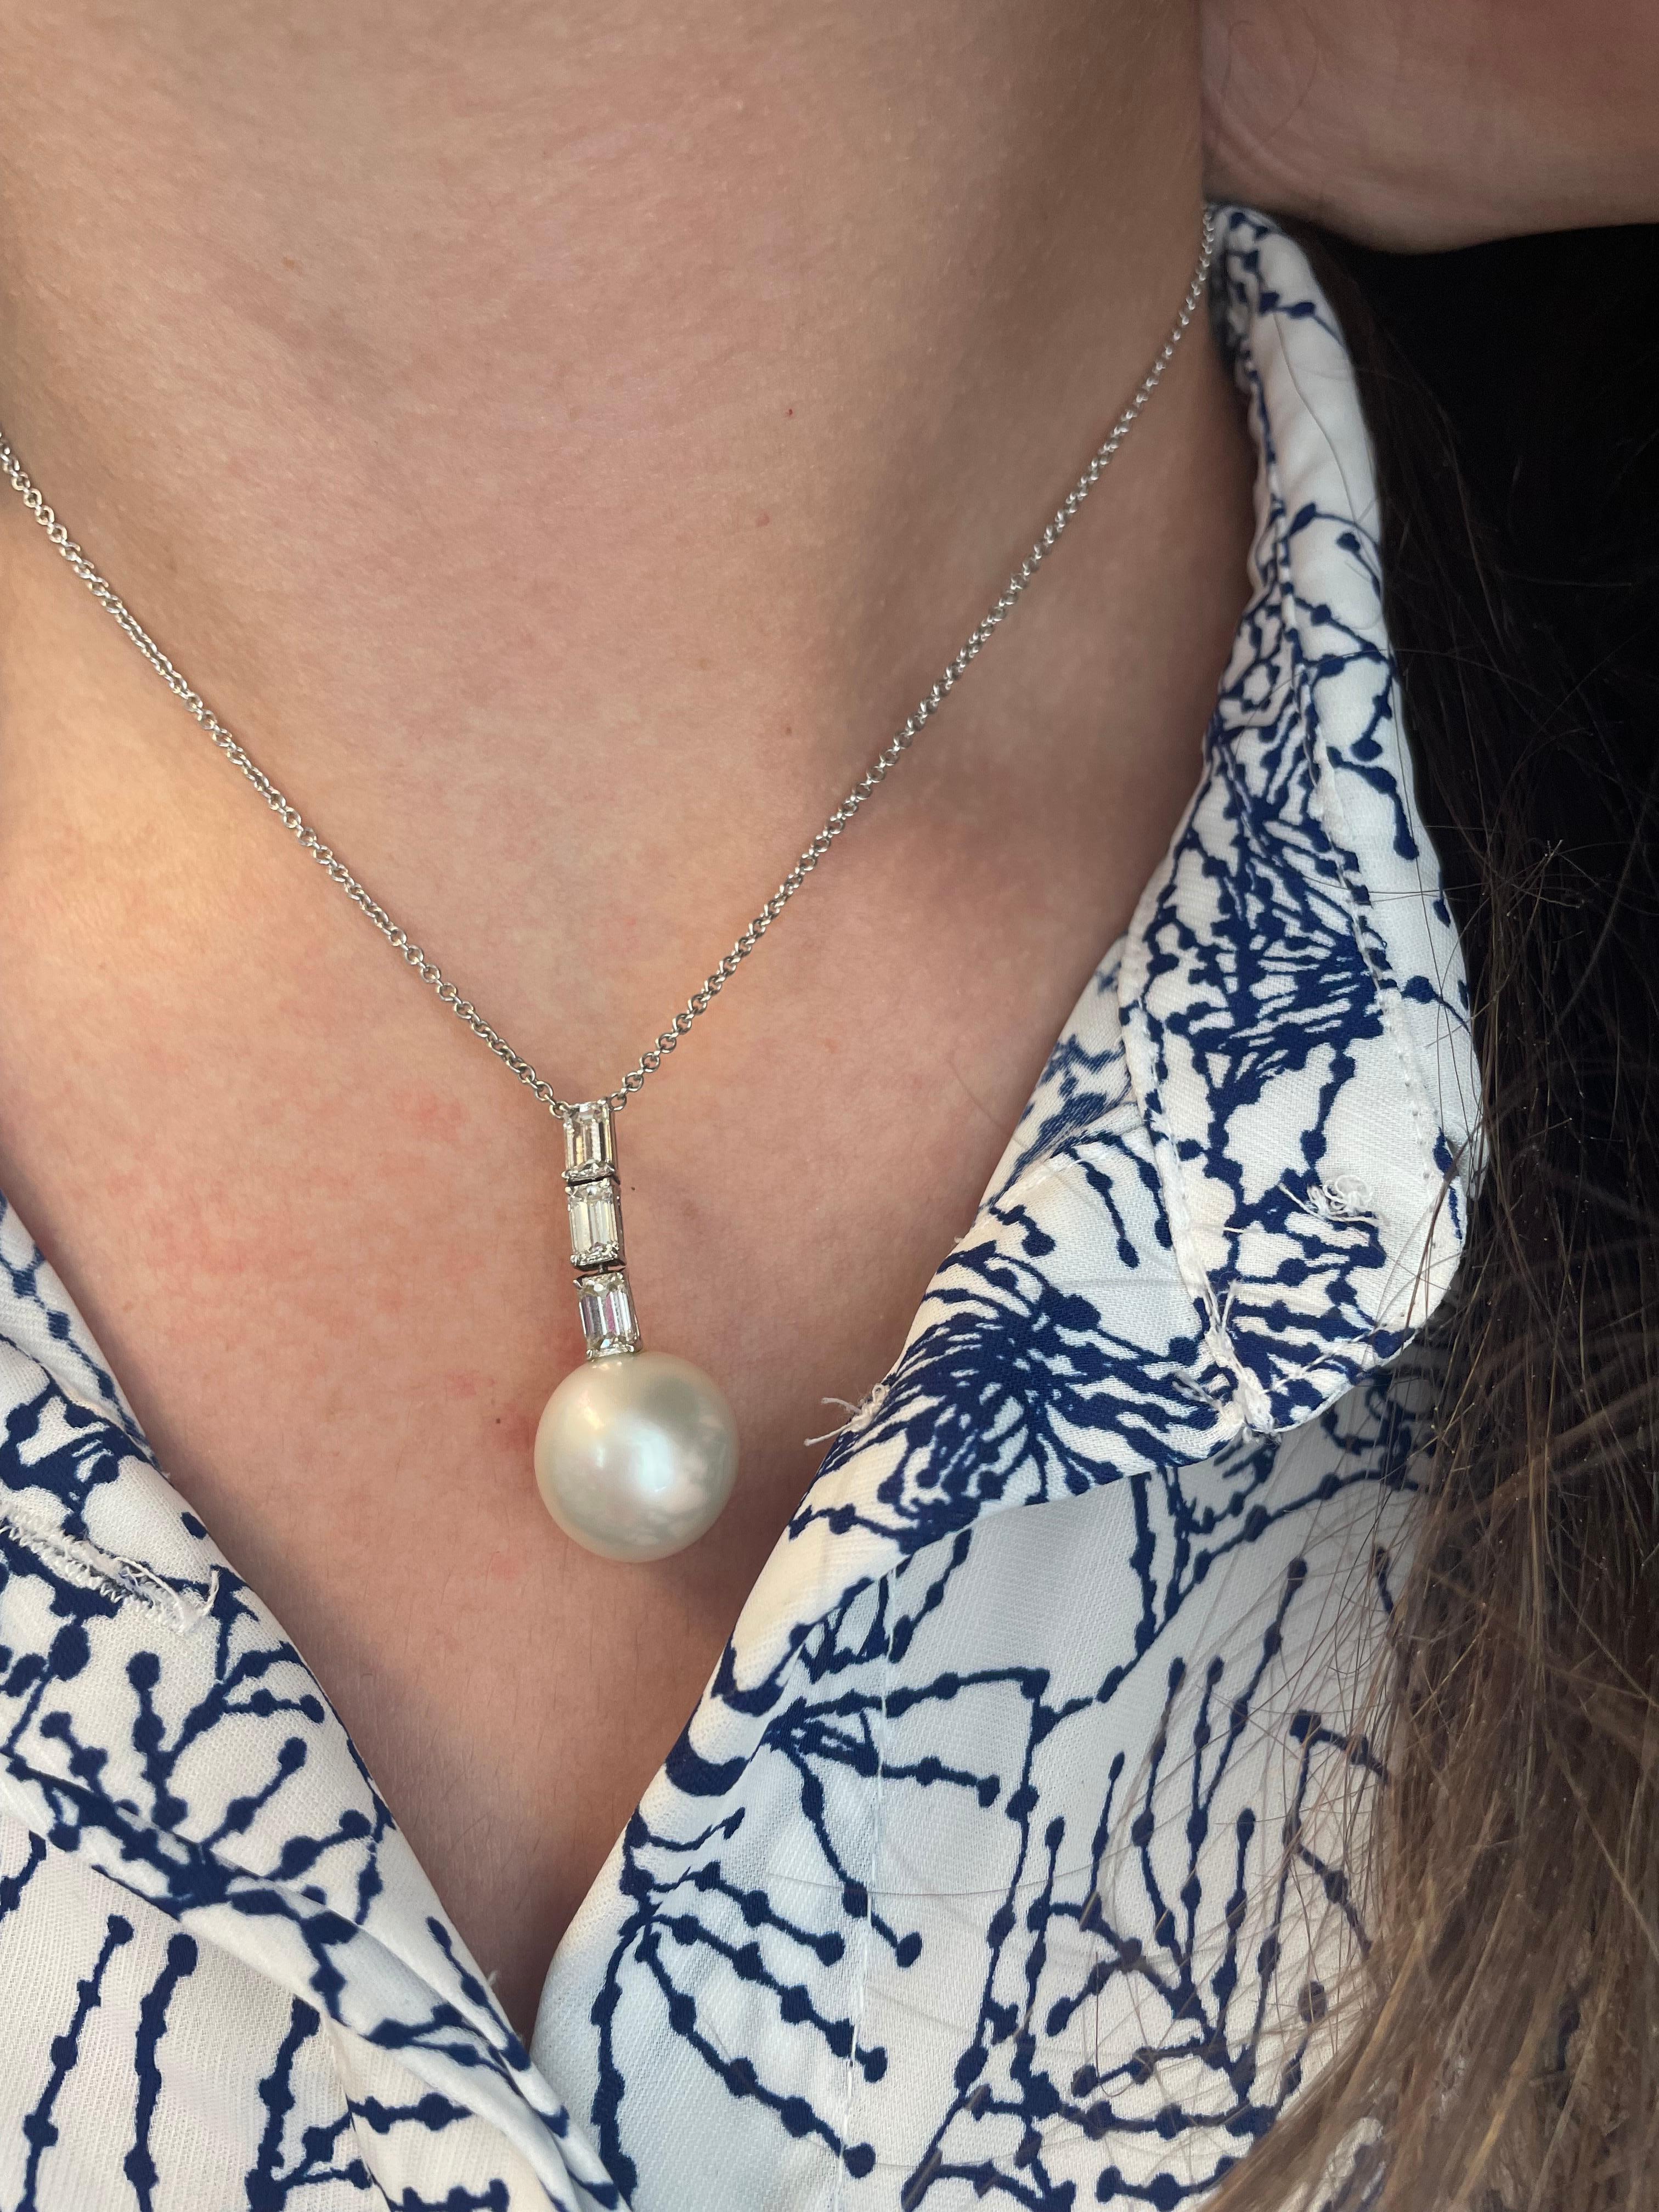 Lovely baguette diamond and pearl pendant necklace.
3 baguette cut diamonds, 1.28ct. Approximately G/H color and SI clarity. 14mm pearl, 18k white gold.
Accommodated with an up to date appraisal by a GIA G.G. upon request. please contact us with any